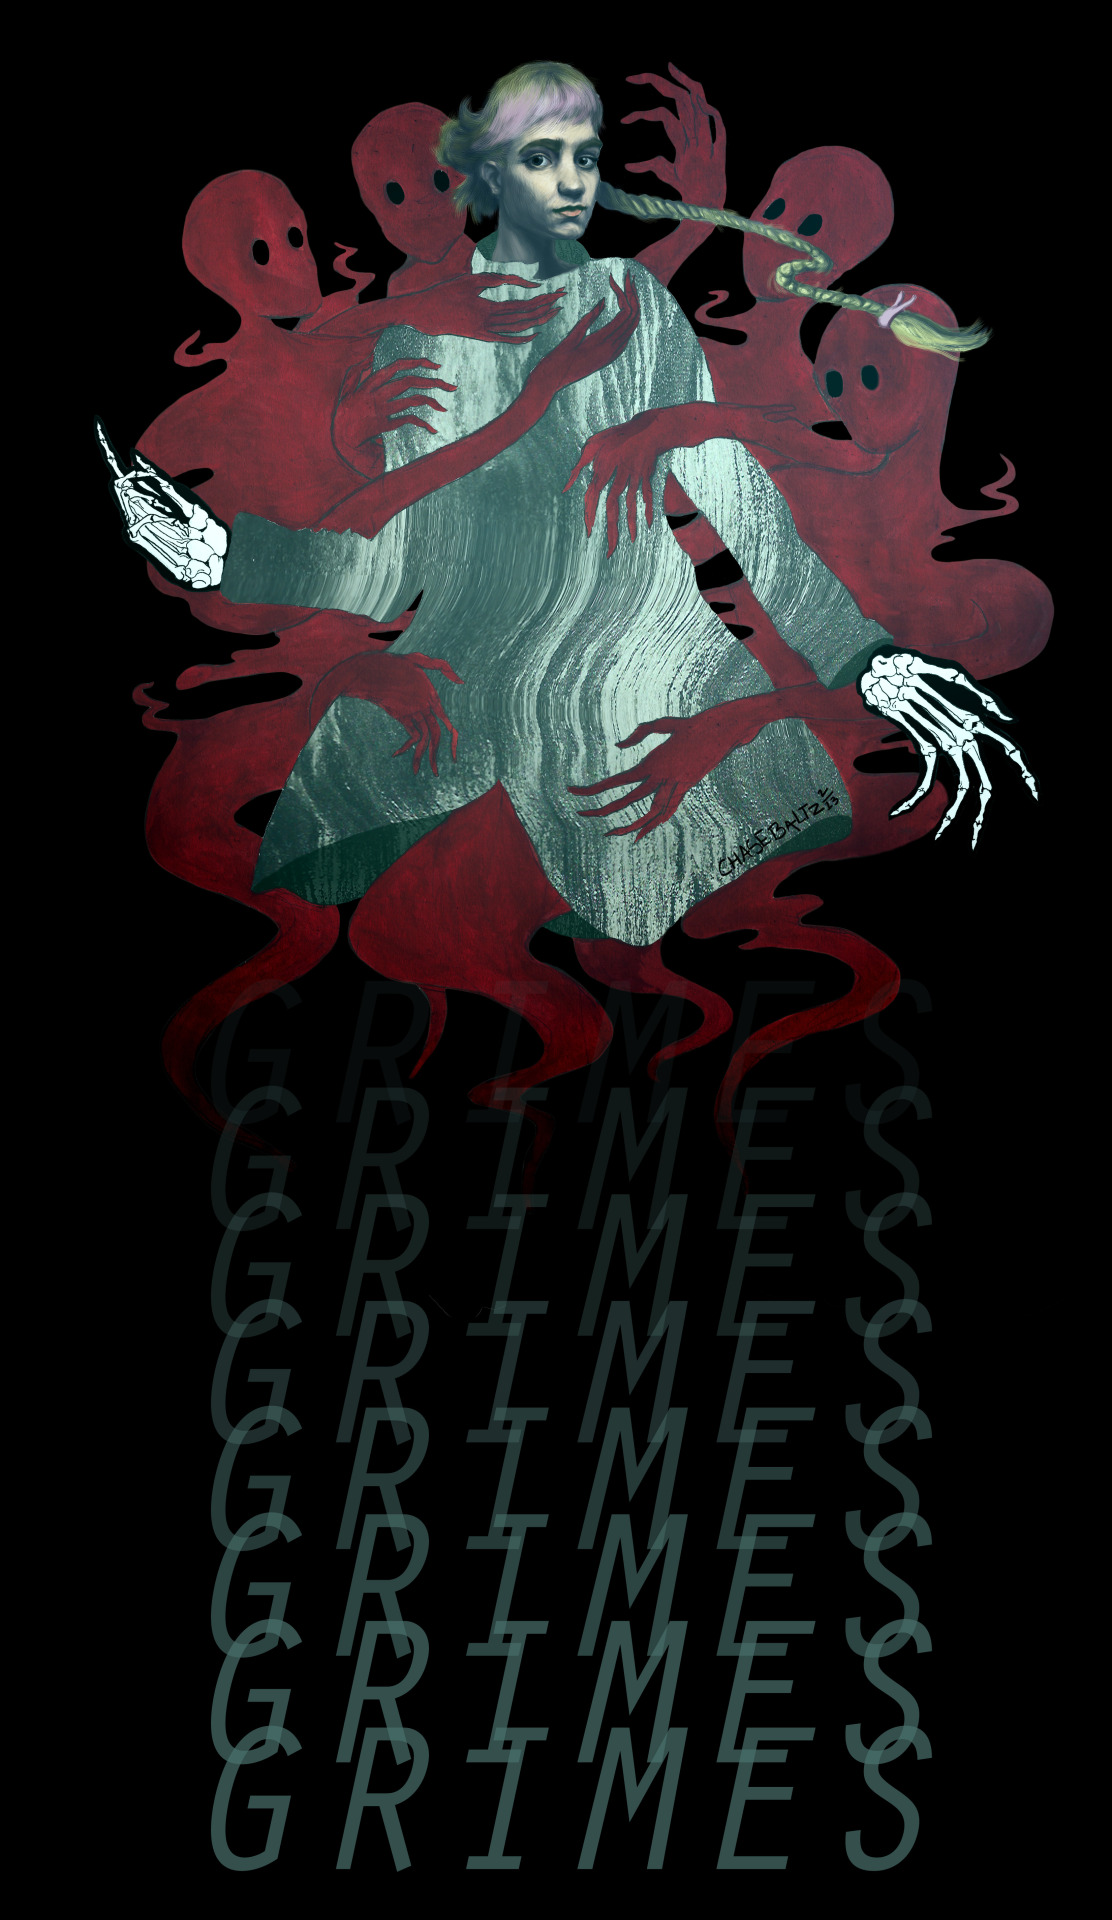 GRIMES © Chase Baltz 2013 See more work here: www.chasebaltz.com Or follow me here: chasebaltzillustration.tumblr.com Cheers!